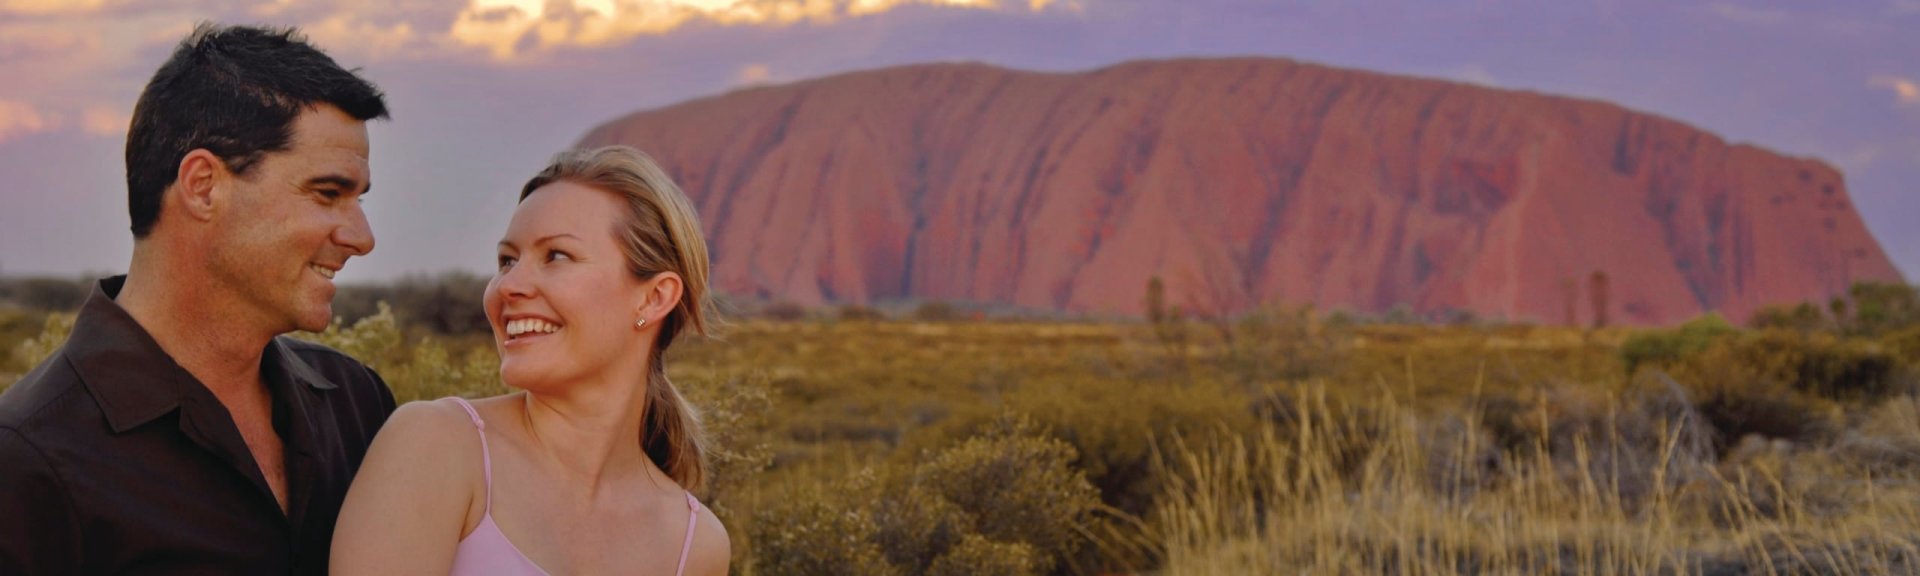 Sunset at Uluru is a must for any itinerary. Photo: Tourism Australia